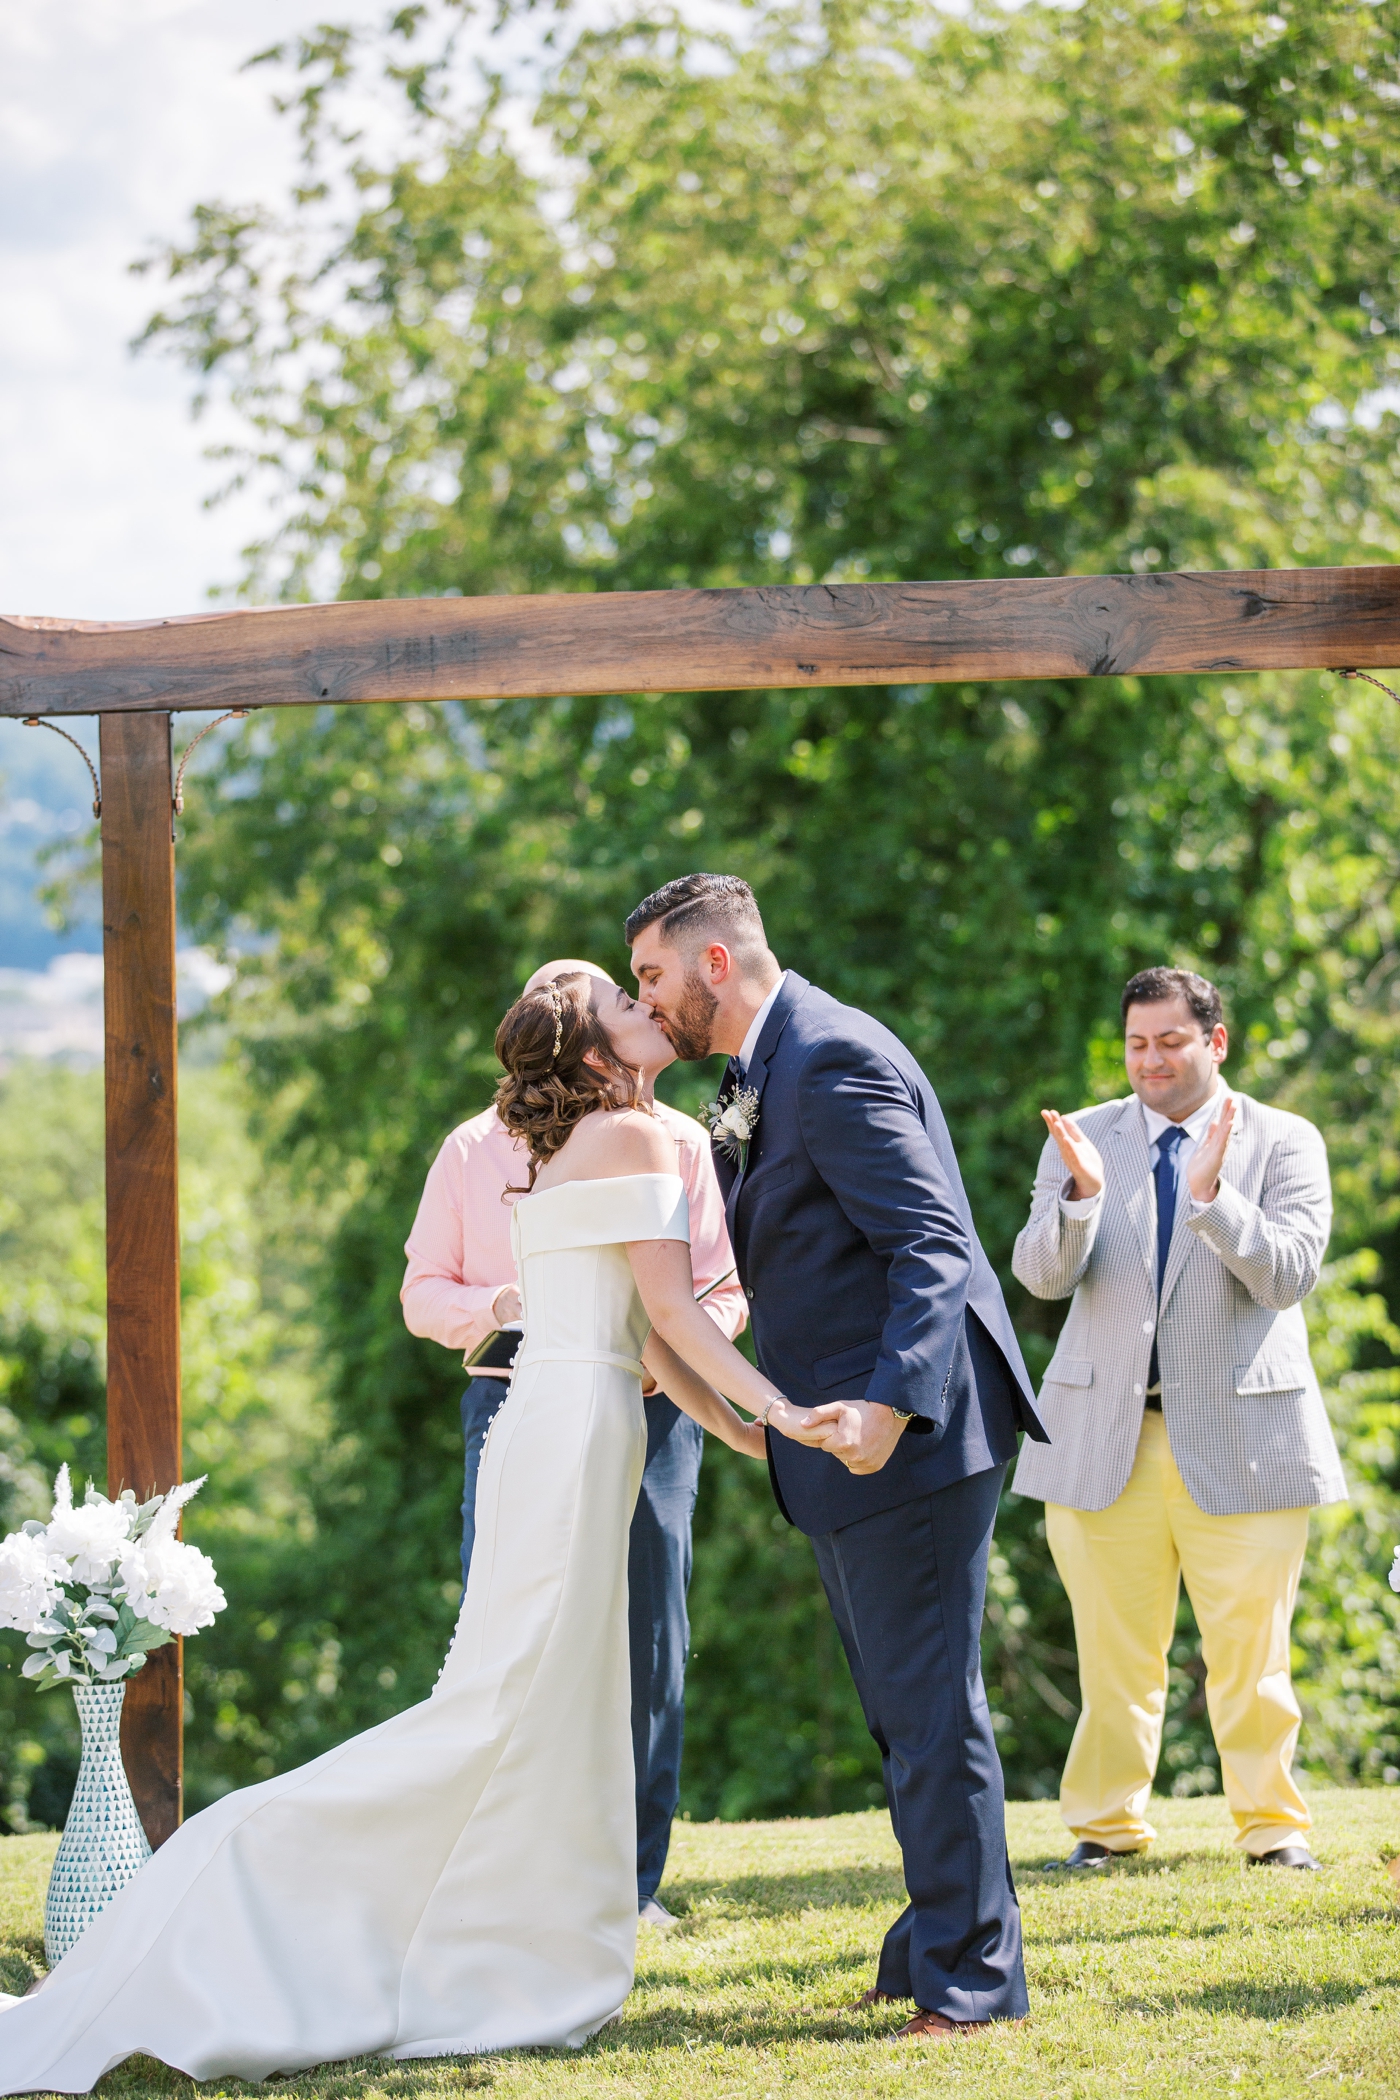 Outdoor wedding ceremony at Edgewood Country Club